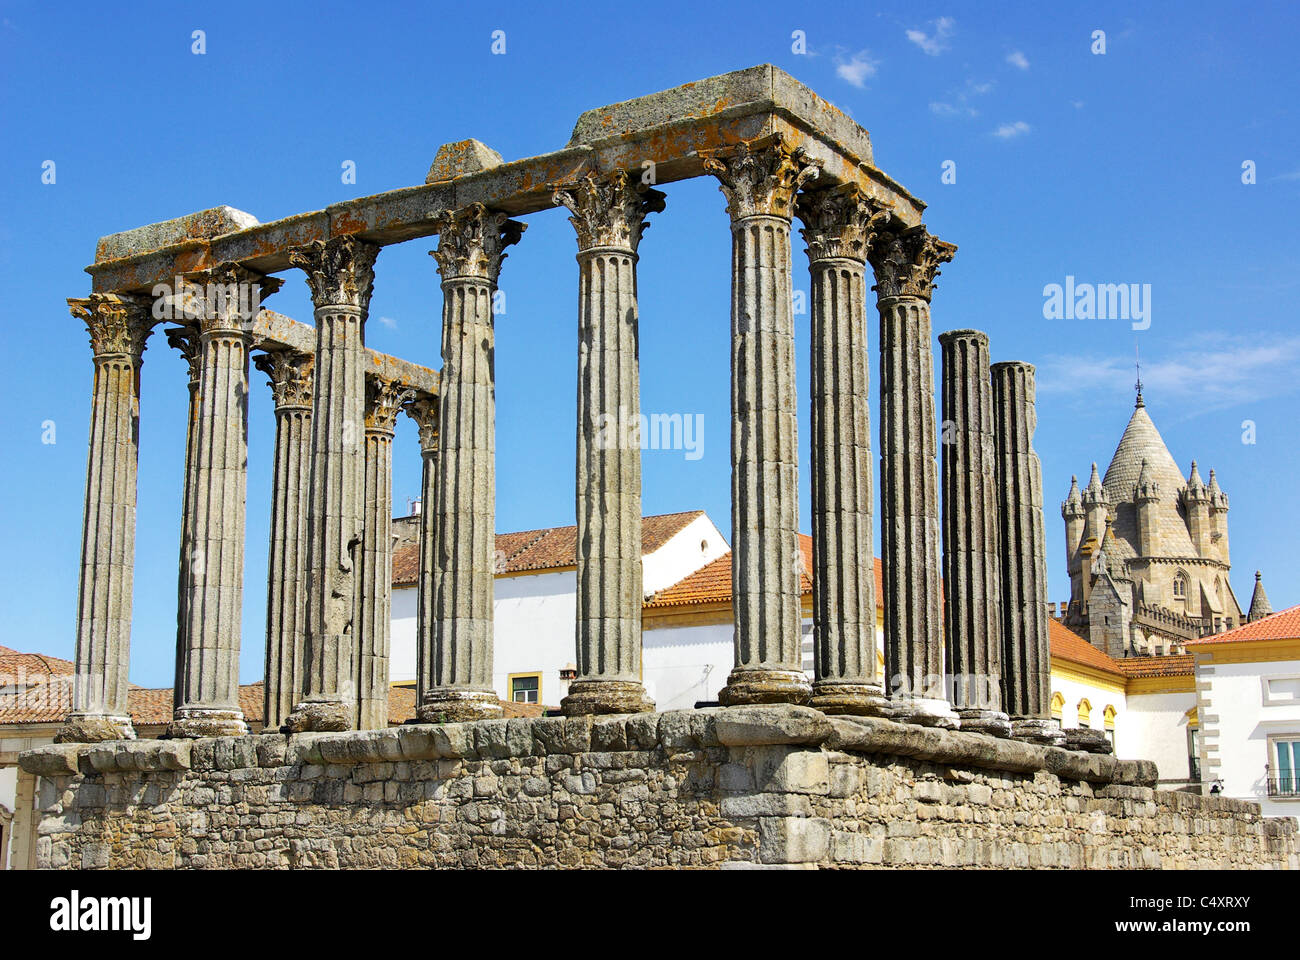 Roman temple and cathedral tower of Evora, Portugal. Stock Photo